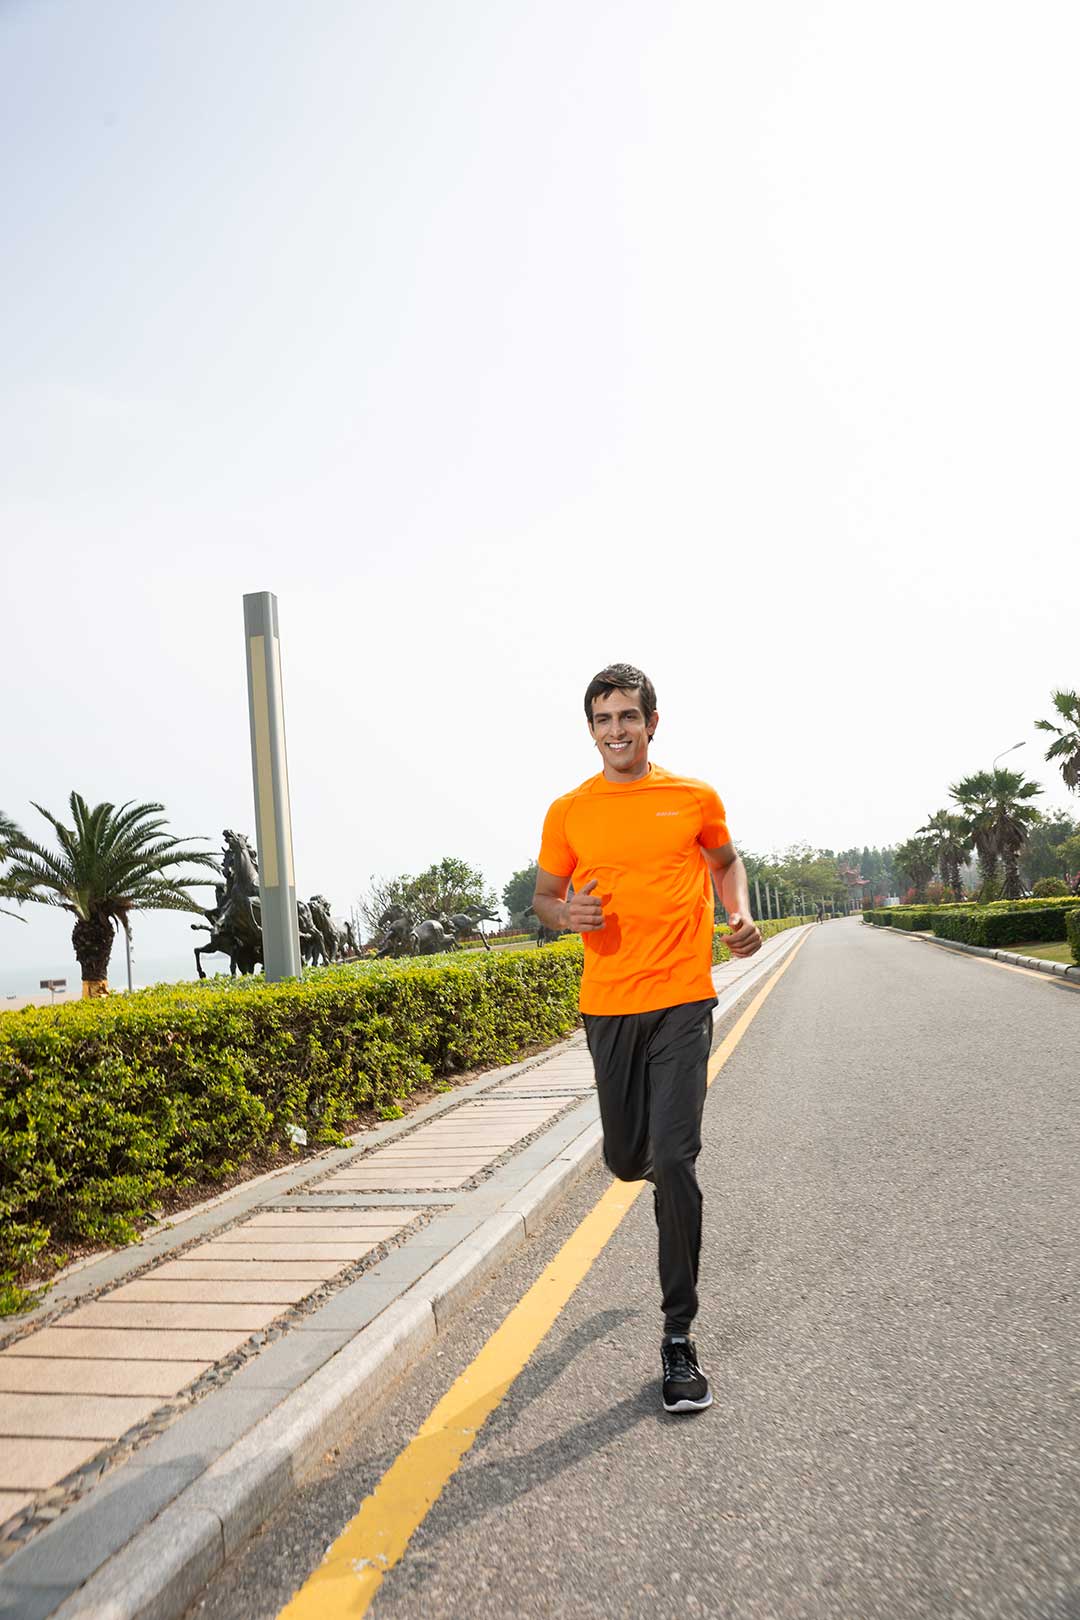 How To Motivate Yourself To Get Back To Running After a Long Break